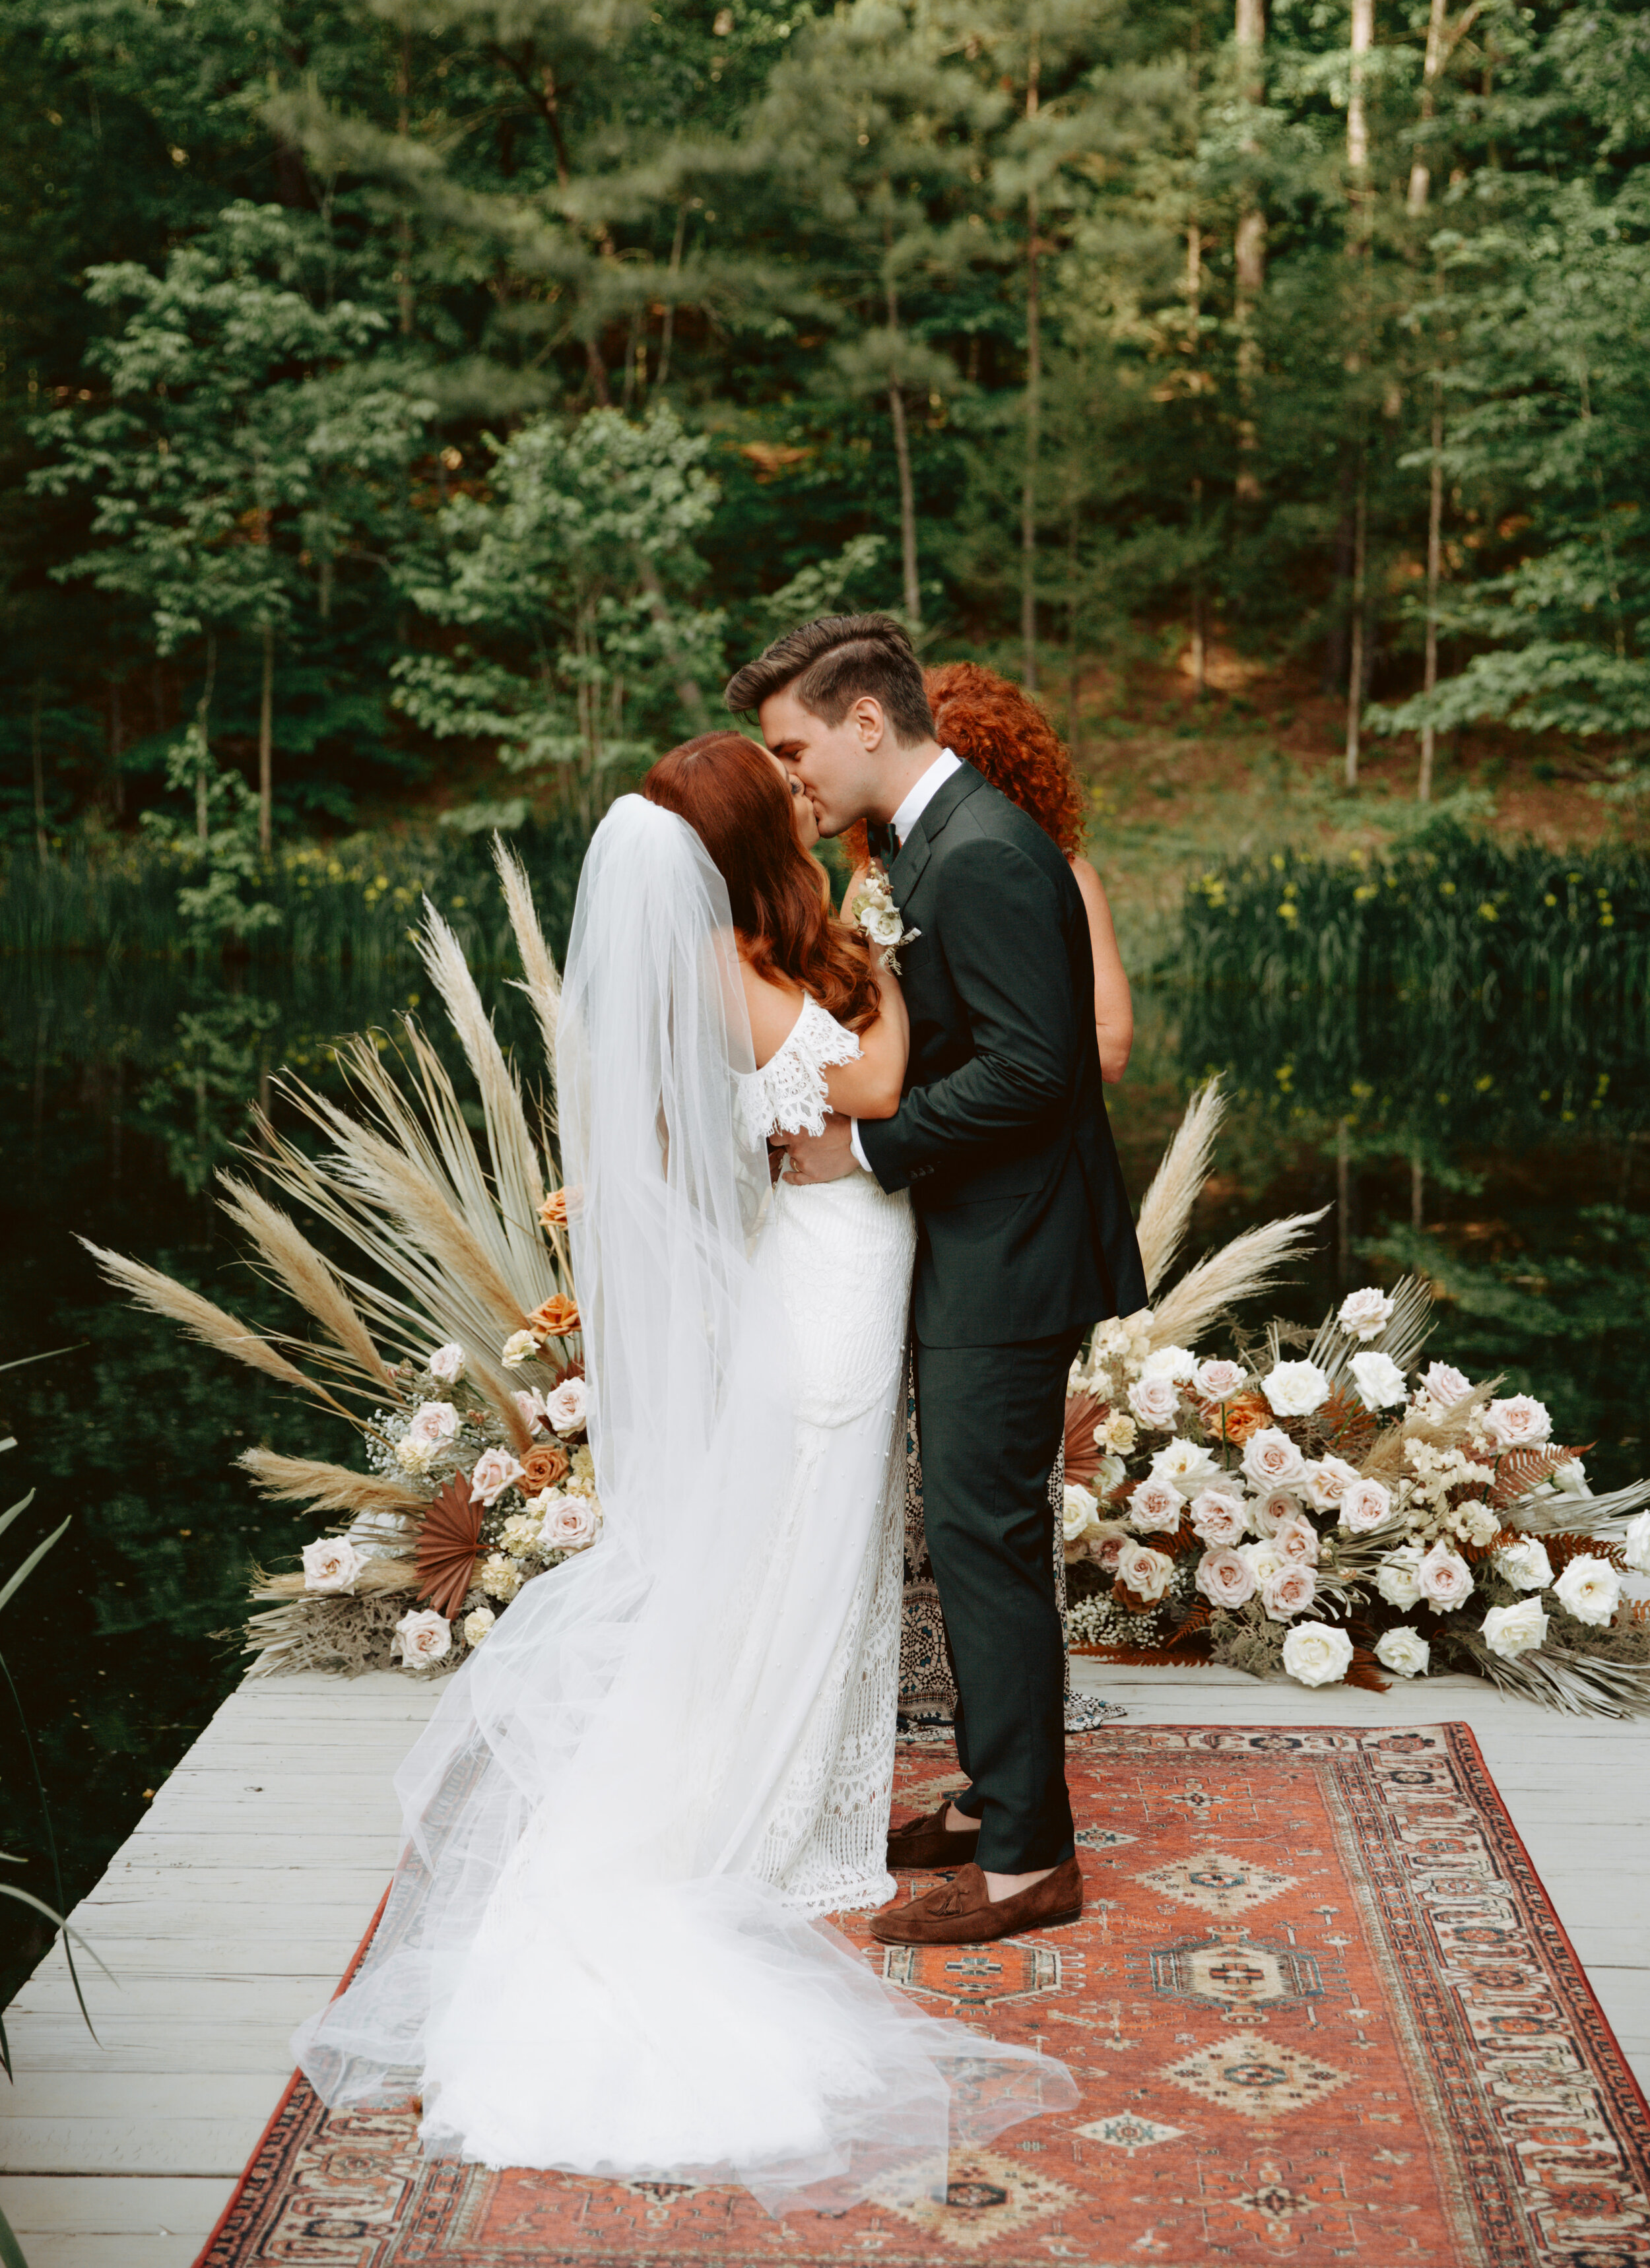 Bohemian, modern floral installation with gold and blush roses, pampas grass, dried ferns, and dried palms, growing on a private dock with a Turkish rug. Nashville wedding florist.